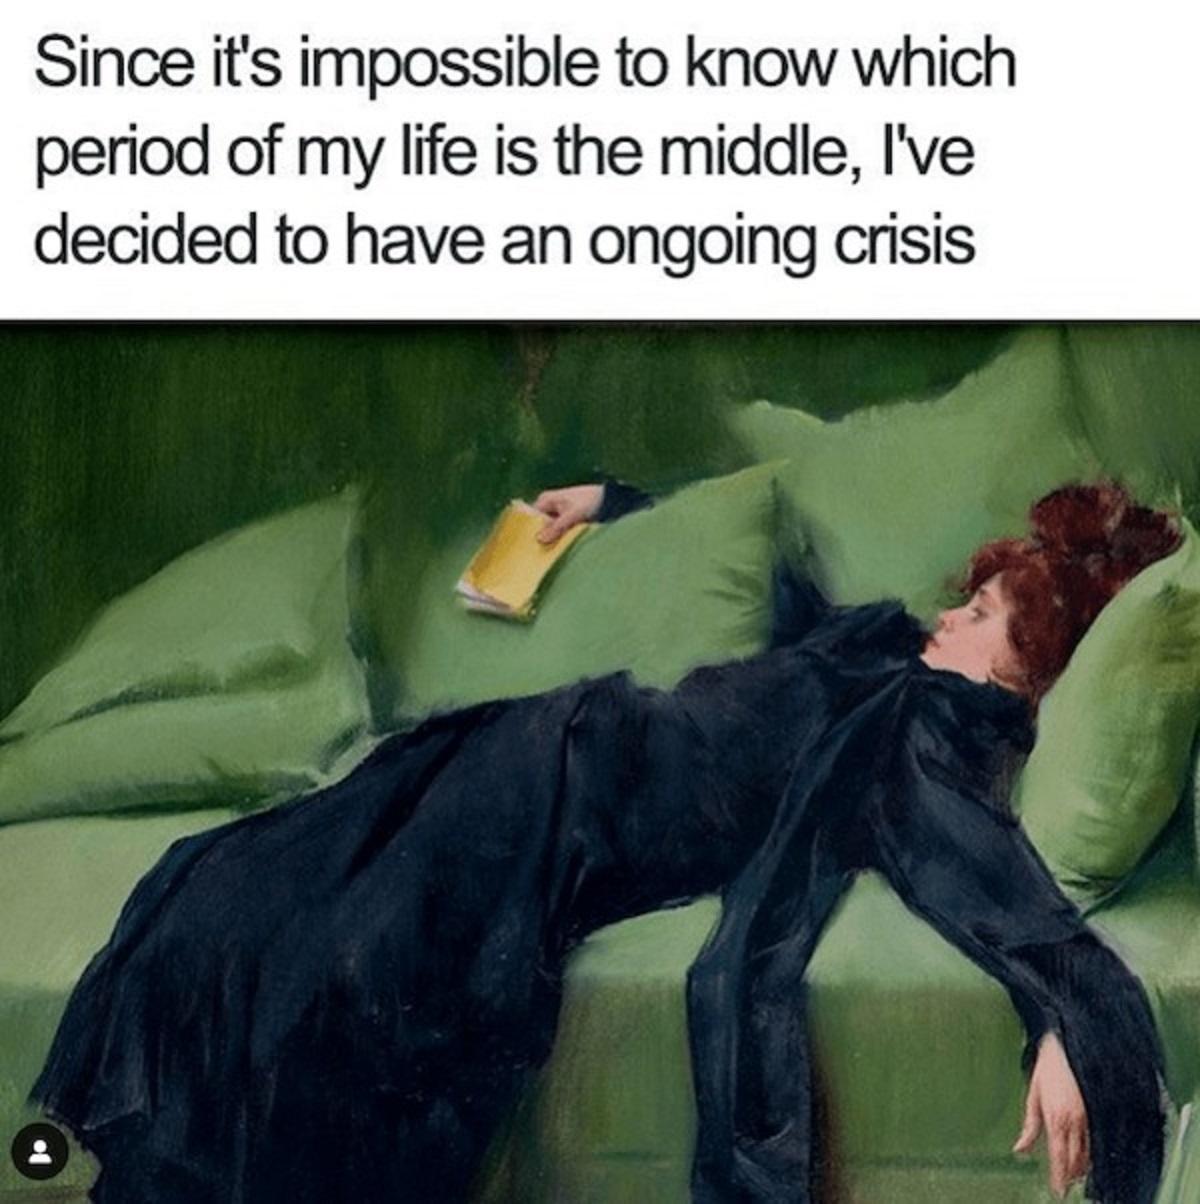 classical art memes - Since it's impossible to know which period of my life is the middle, I've decided to have an ongoing crisis